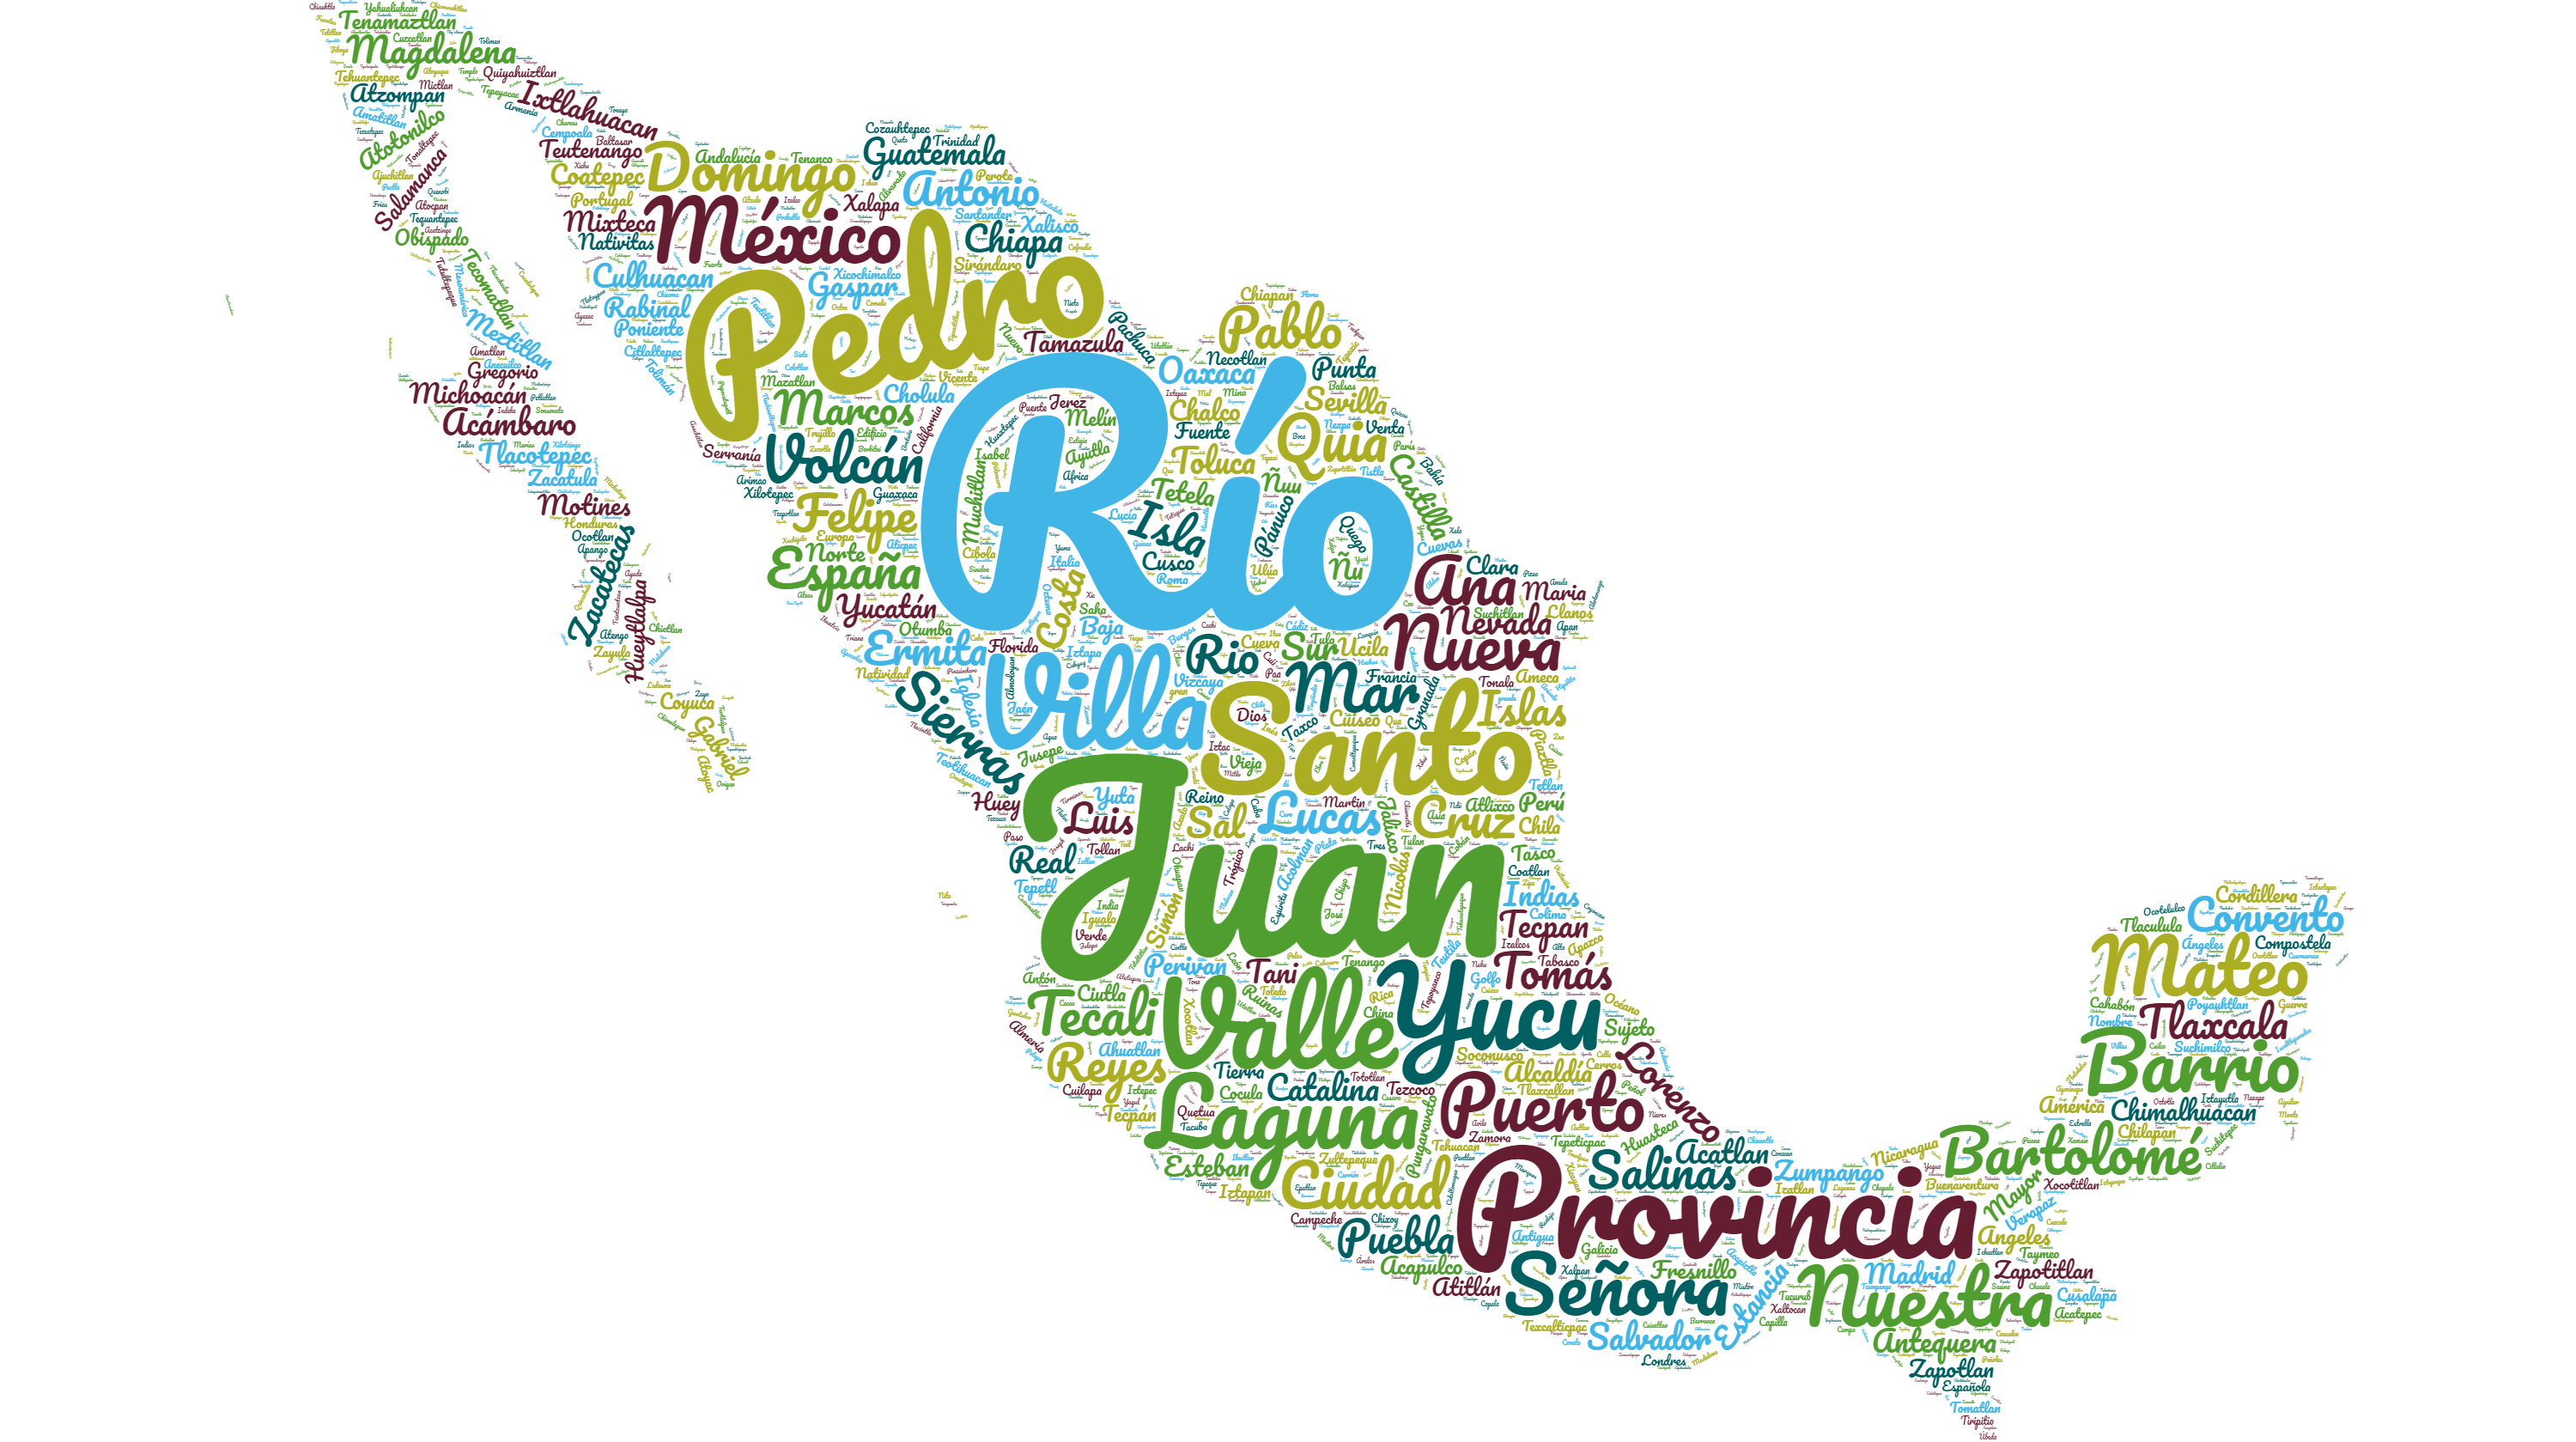 wordcloud comprised of toponyms mentioned in Rene Acuña's editions of the Relaciones Geograficas